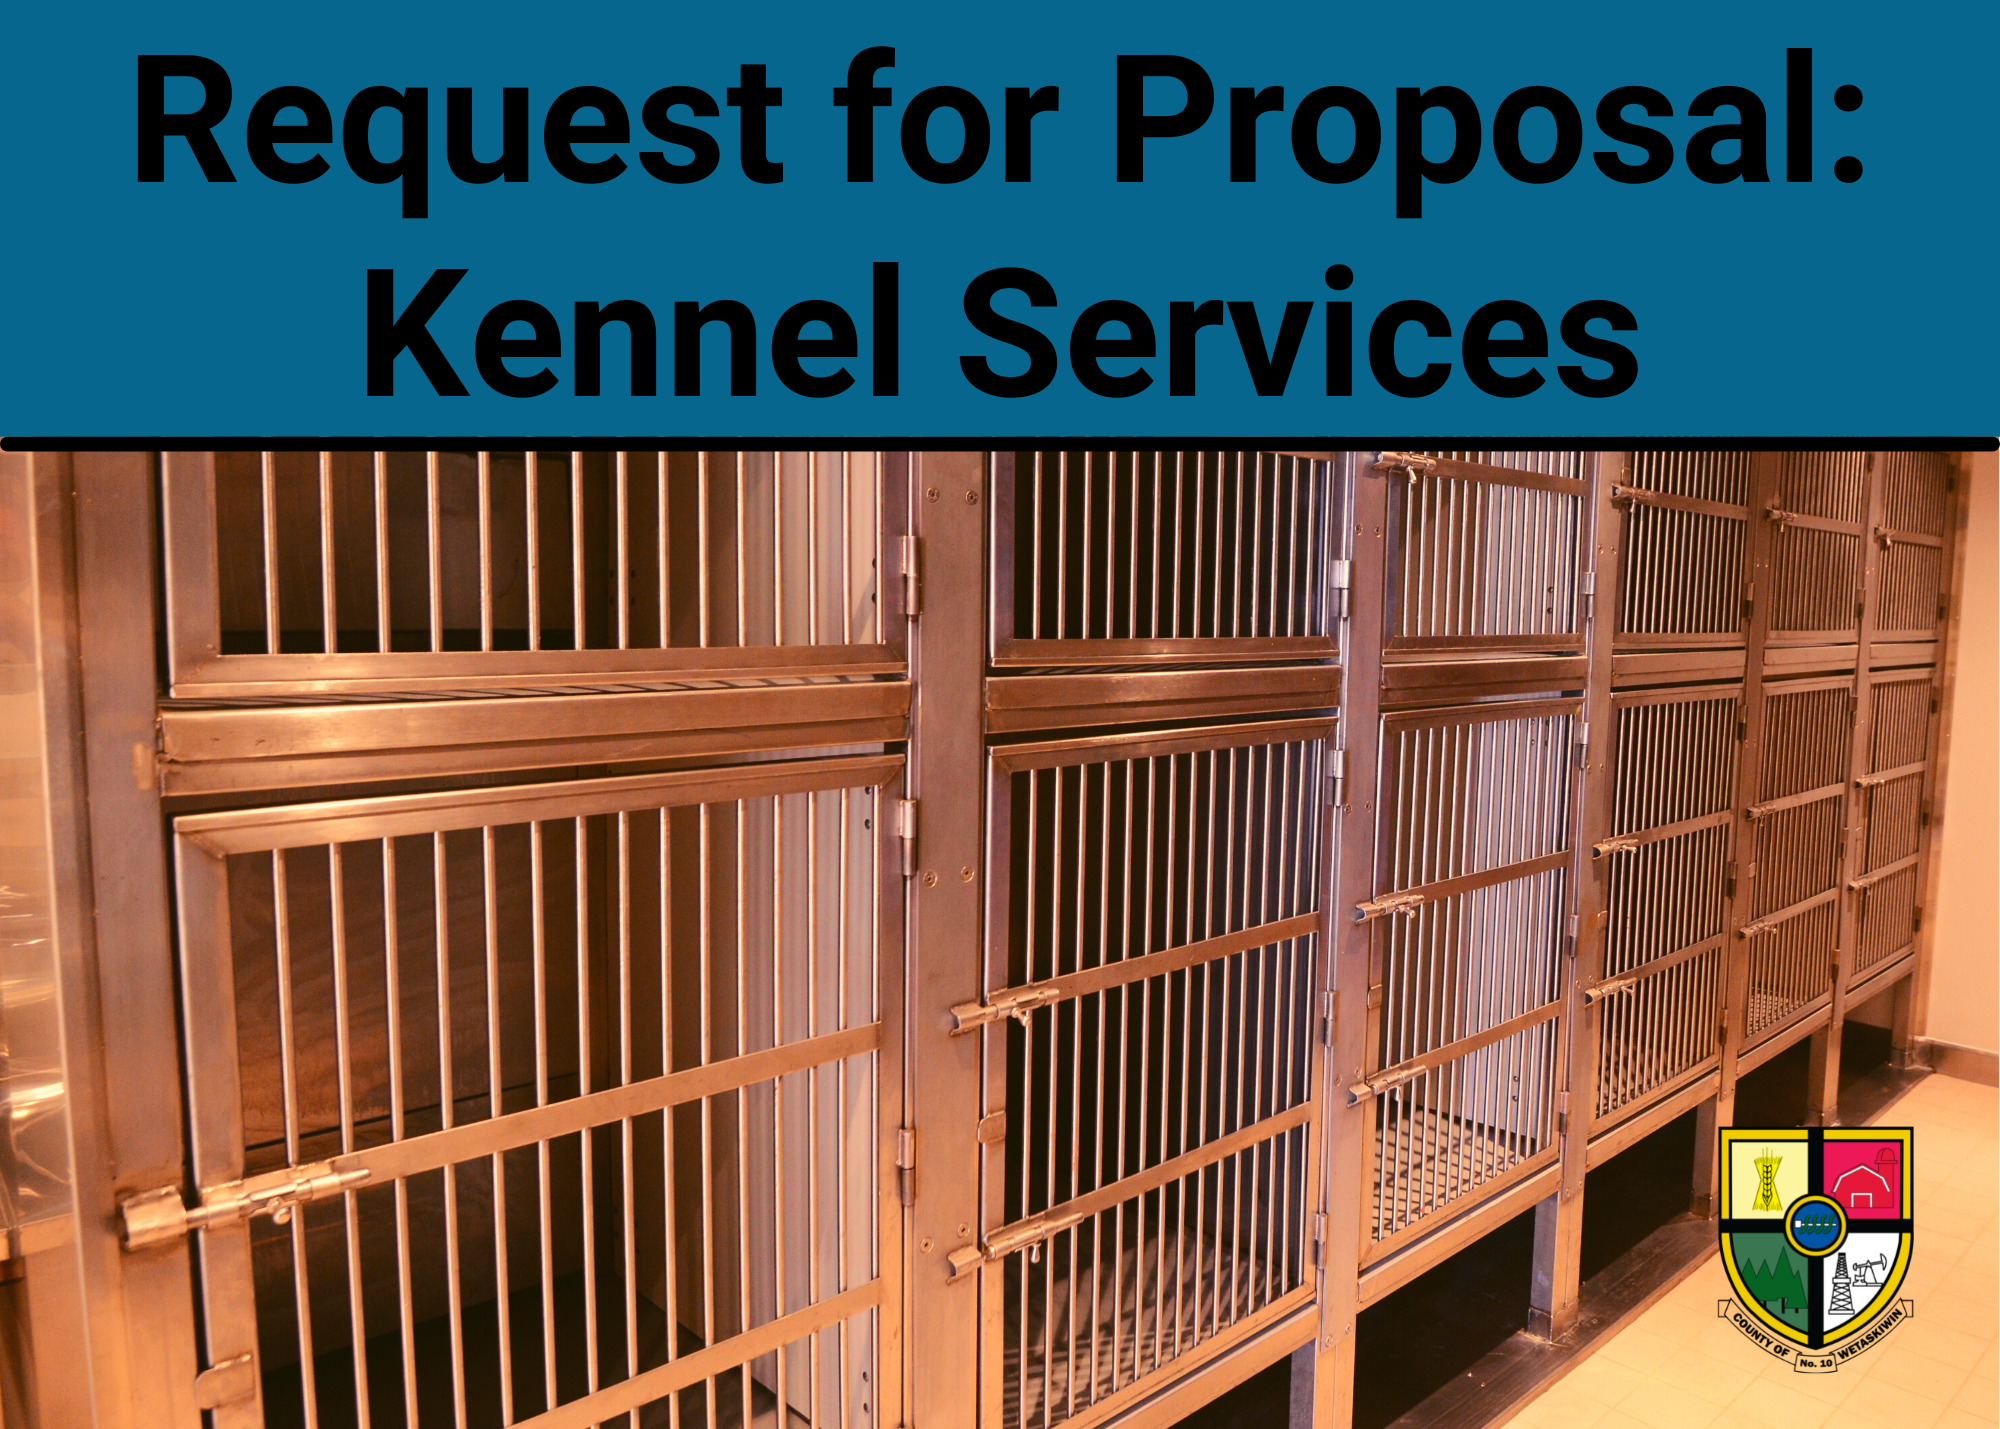 RFP - Kennel Services